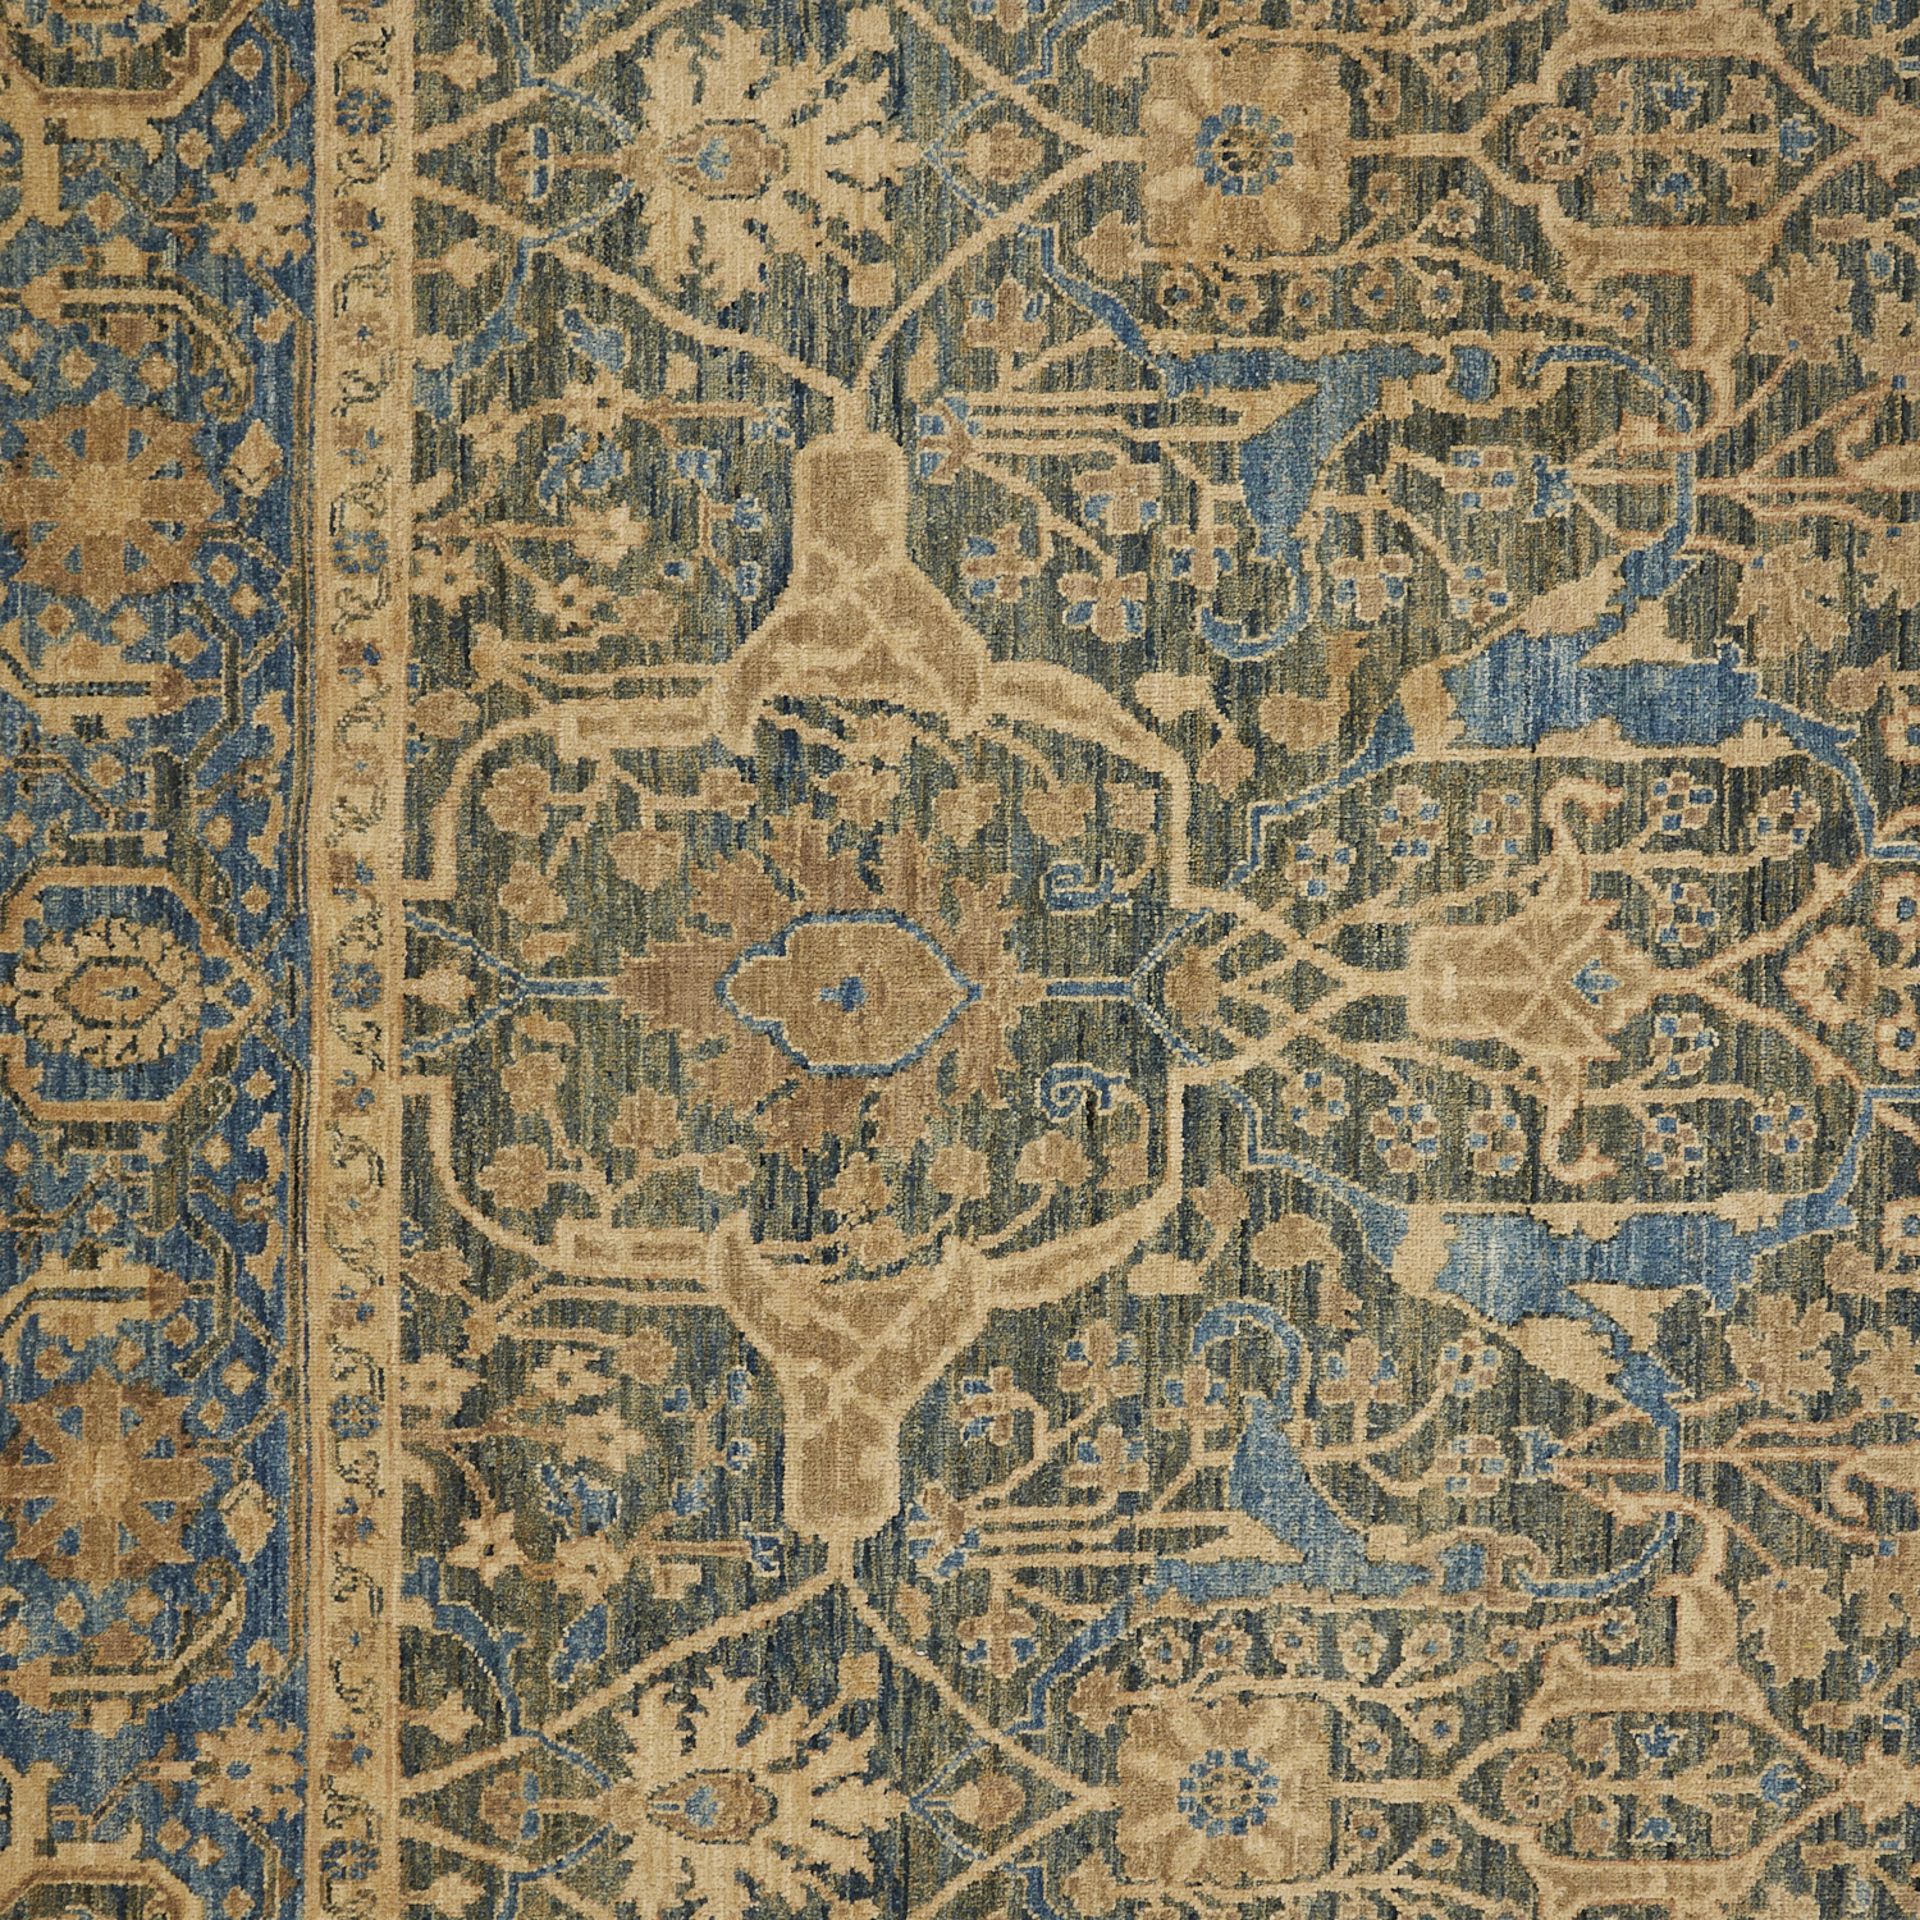 Large Persian Blue & White Floral Rug 10' x 8' - Image 3 of 6